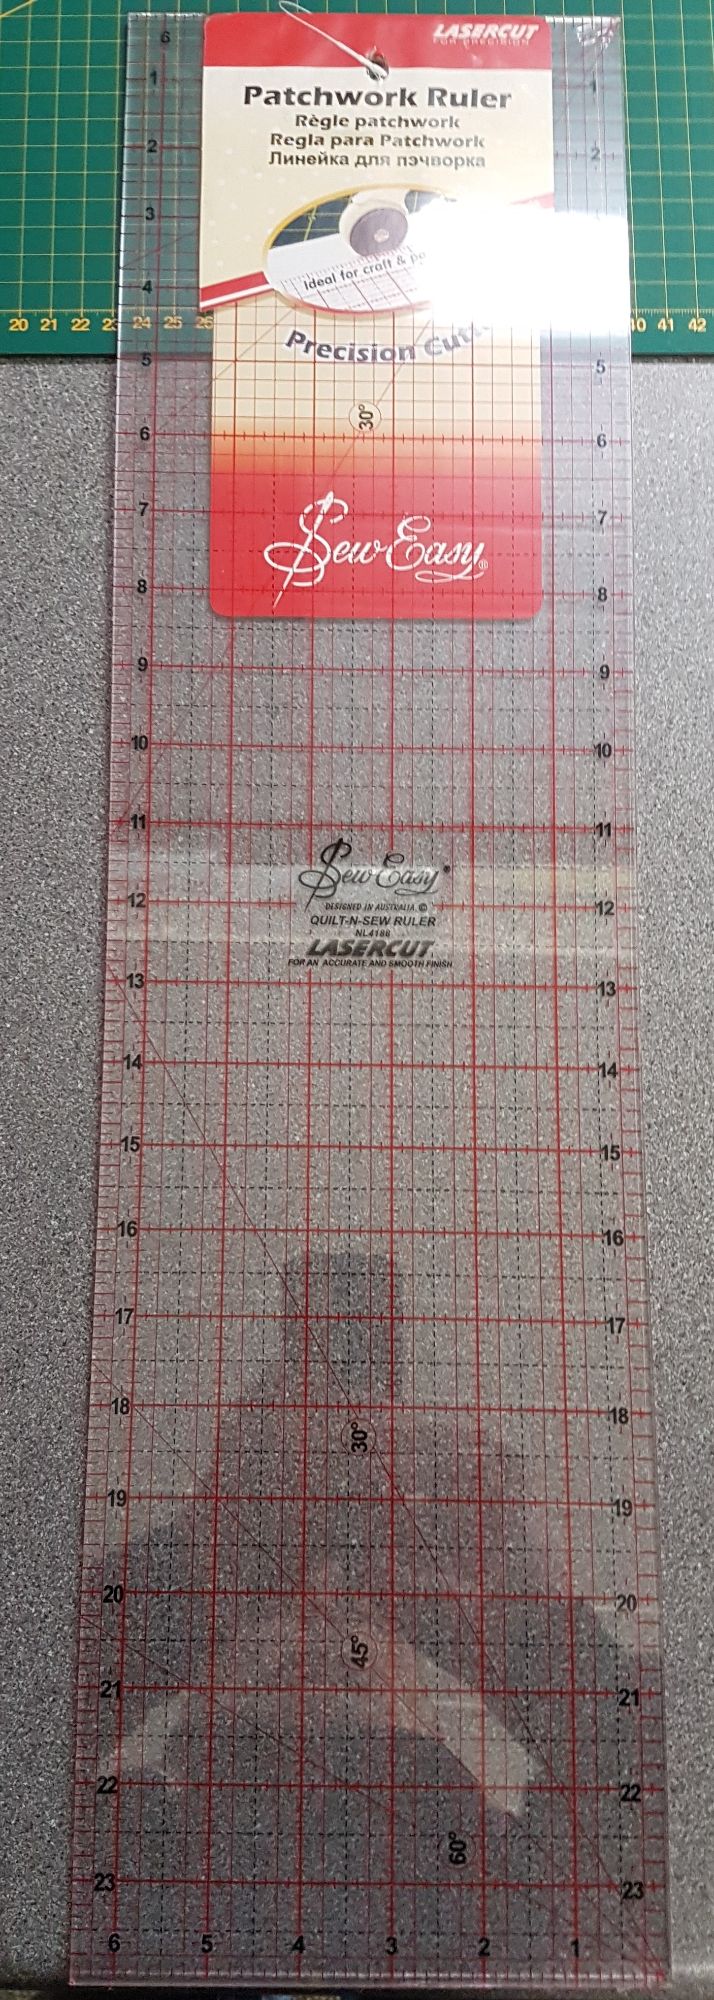 Patchwork ruler by Sew Easy